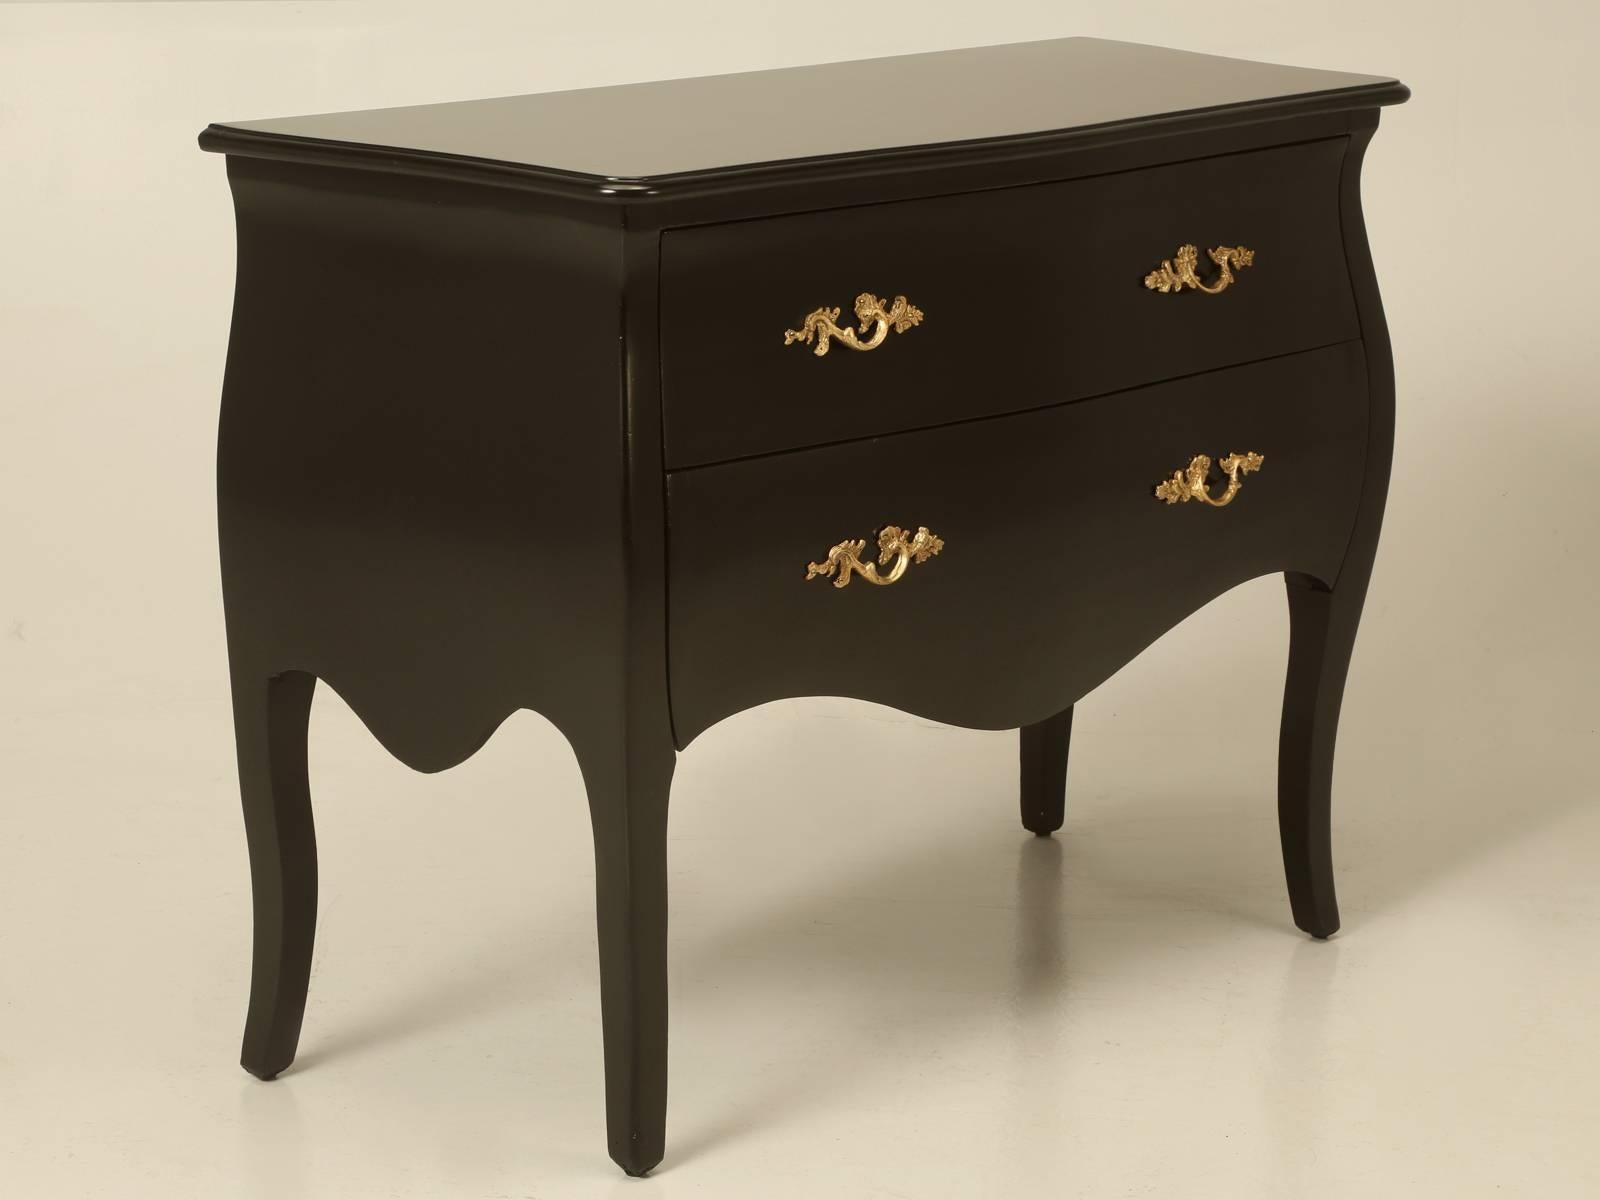 Reproduction French bombe chest or commode, finished in black lacquer that was imported from Holland quite a while ago. Constructed of solid wood and our Old Plank workshop just restored the painted finish, so it is free of any blemish.